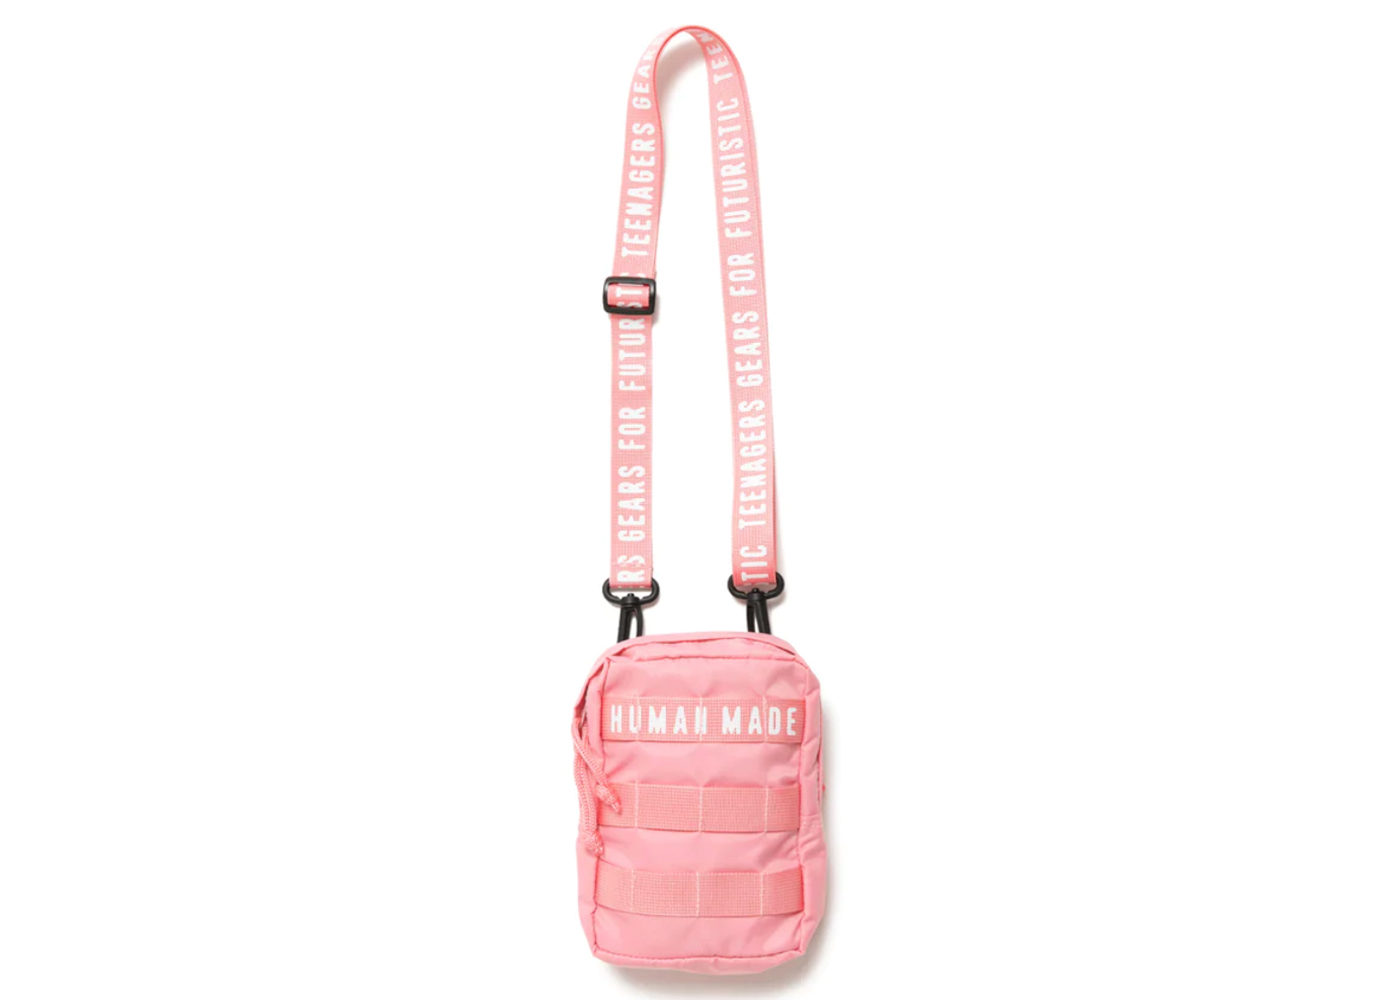 Human Made Military #2 Pouch Pink